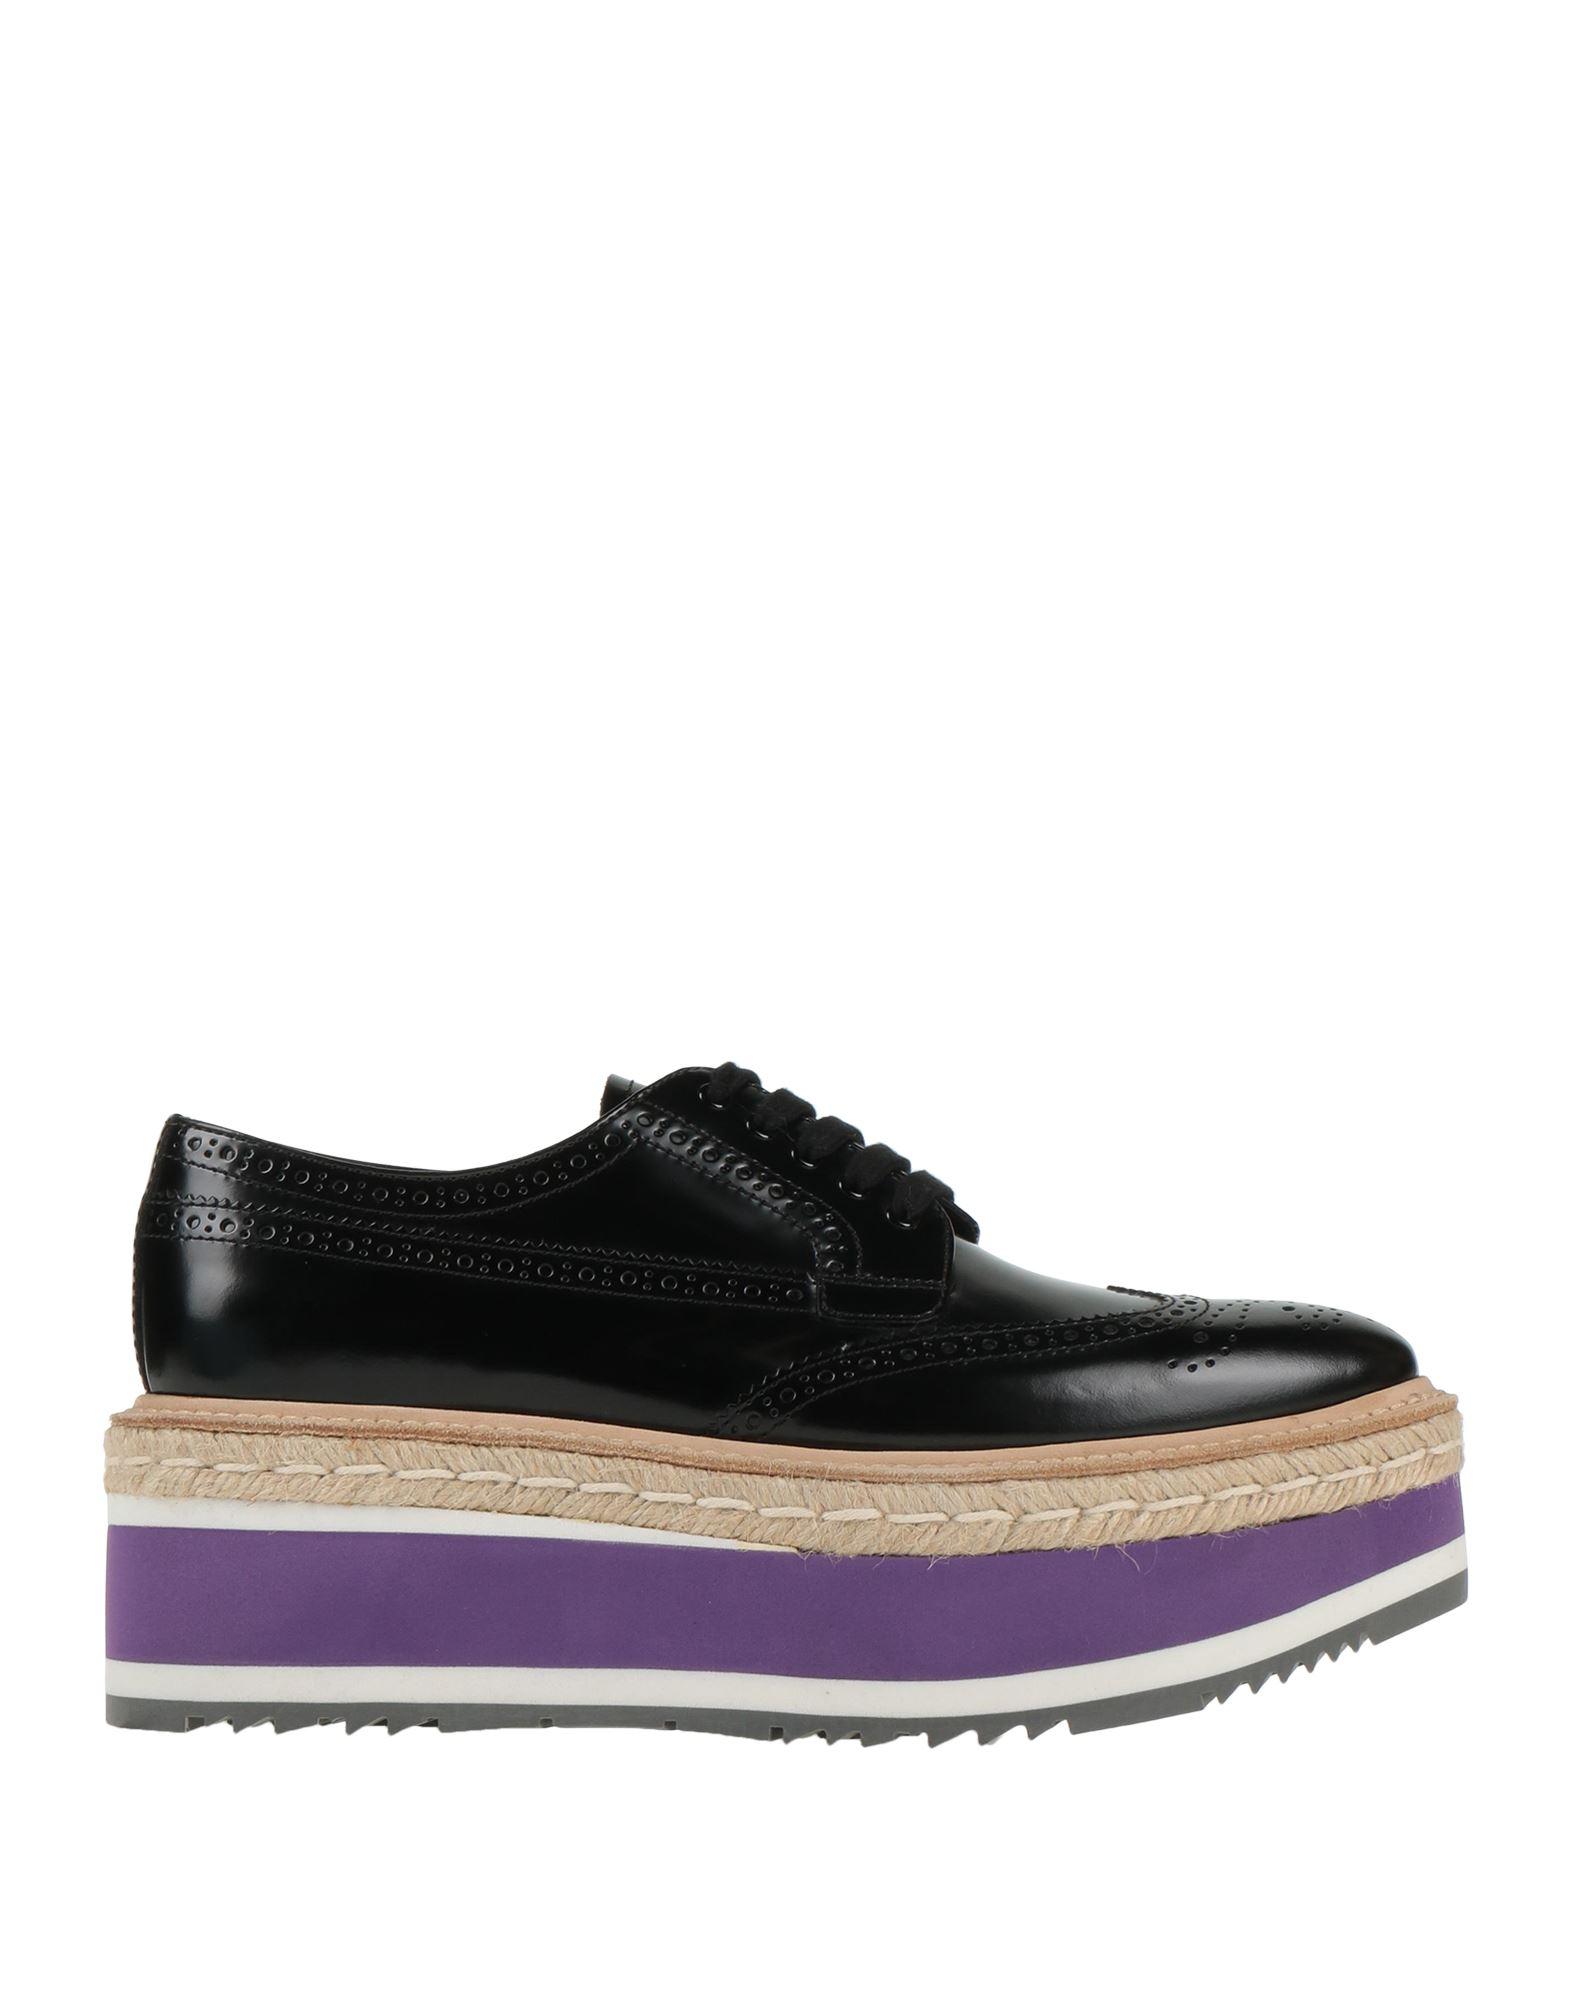 Prada Lace-up Shoes in Black | Lyst